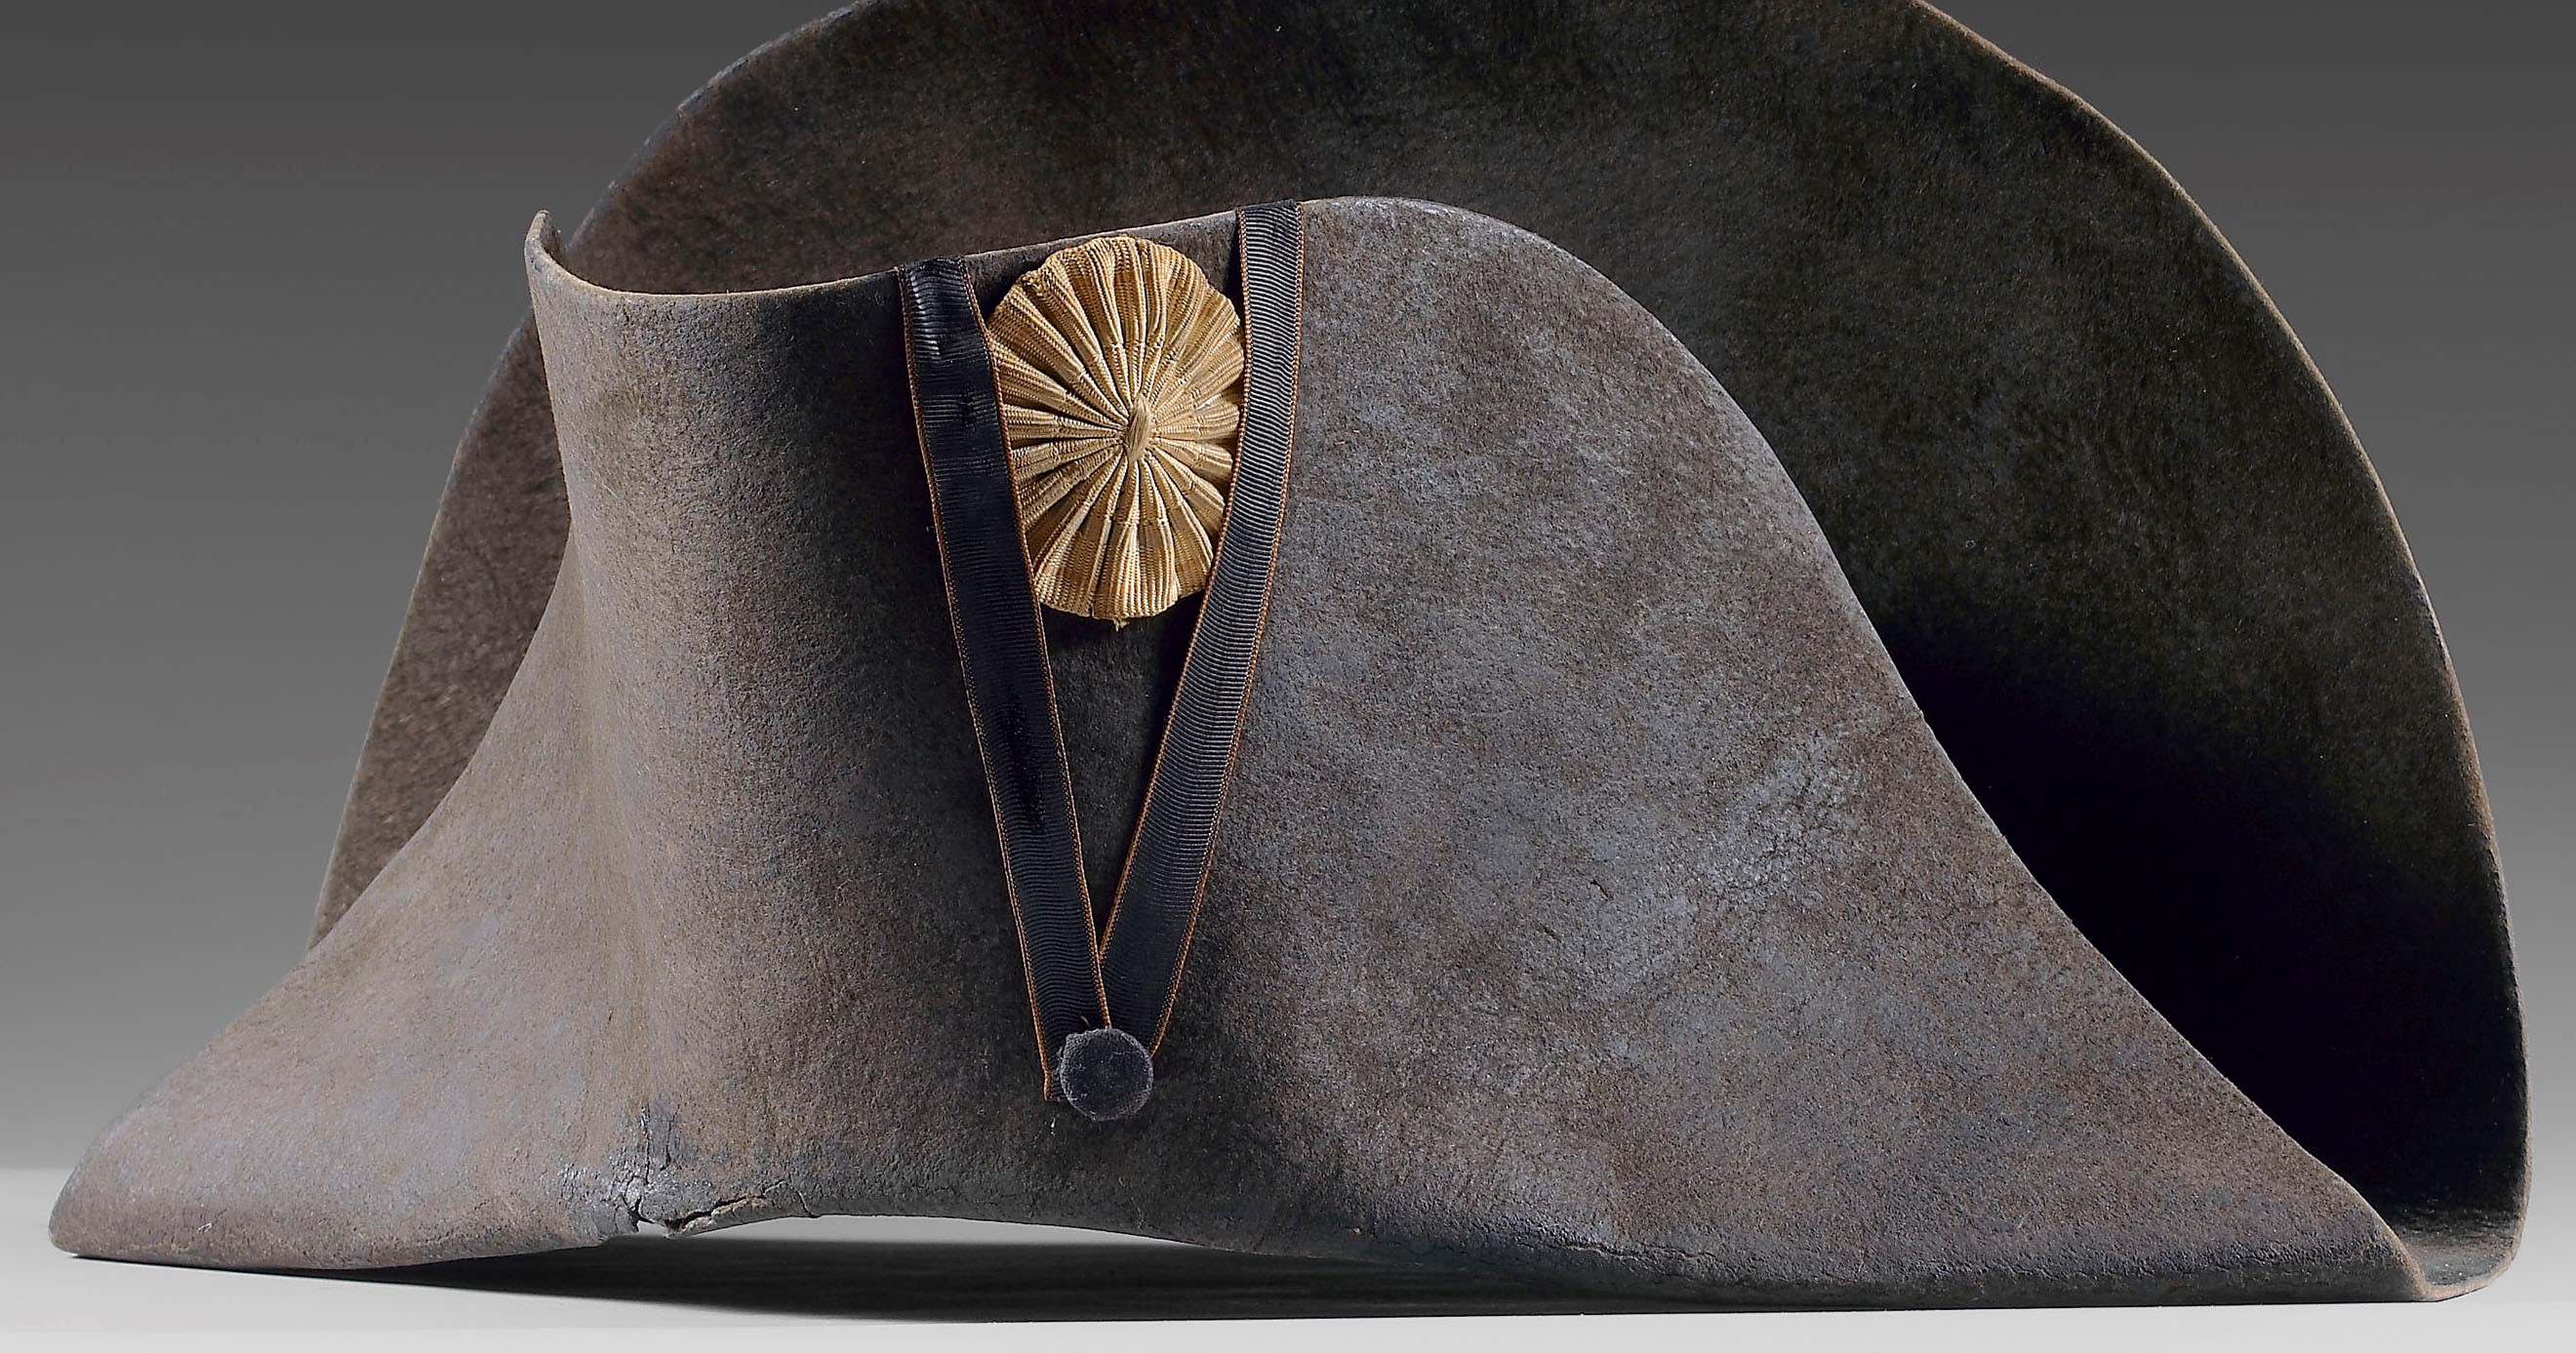 One of Napoleon's famous hats